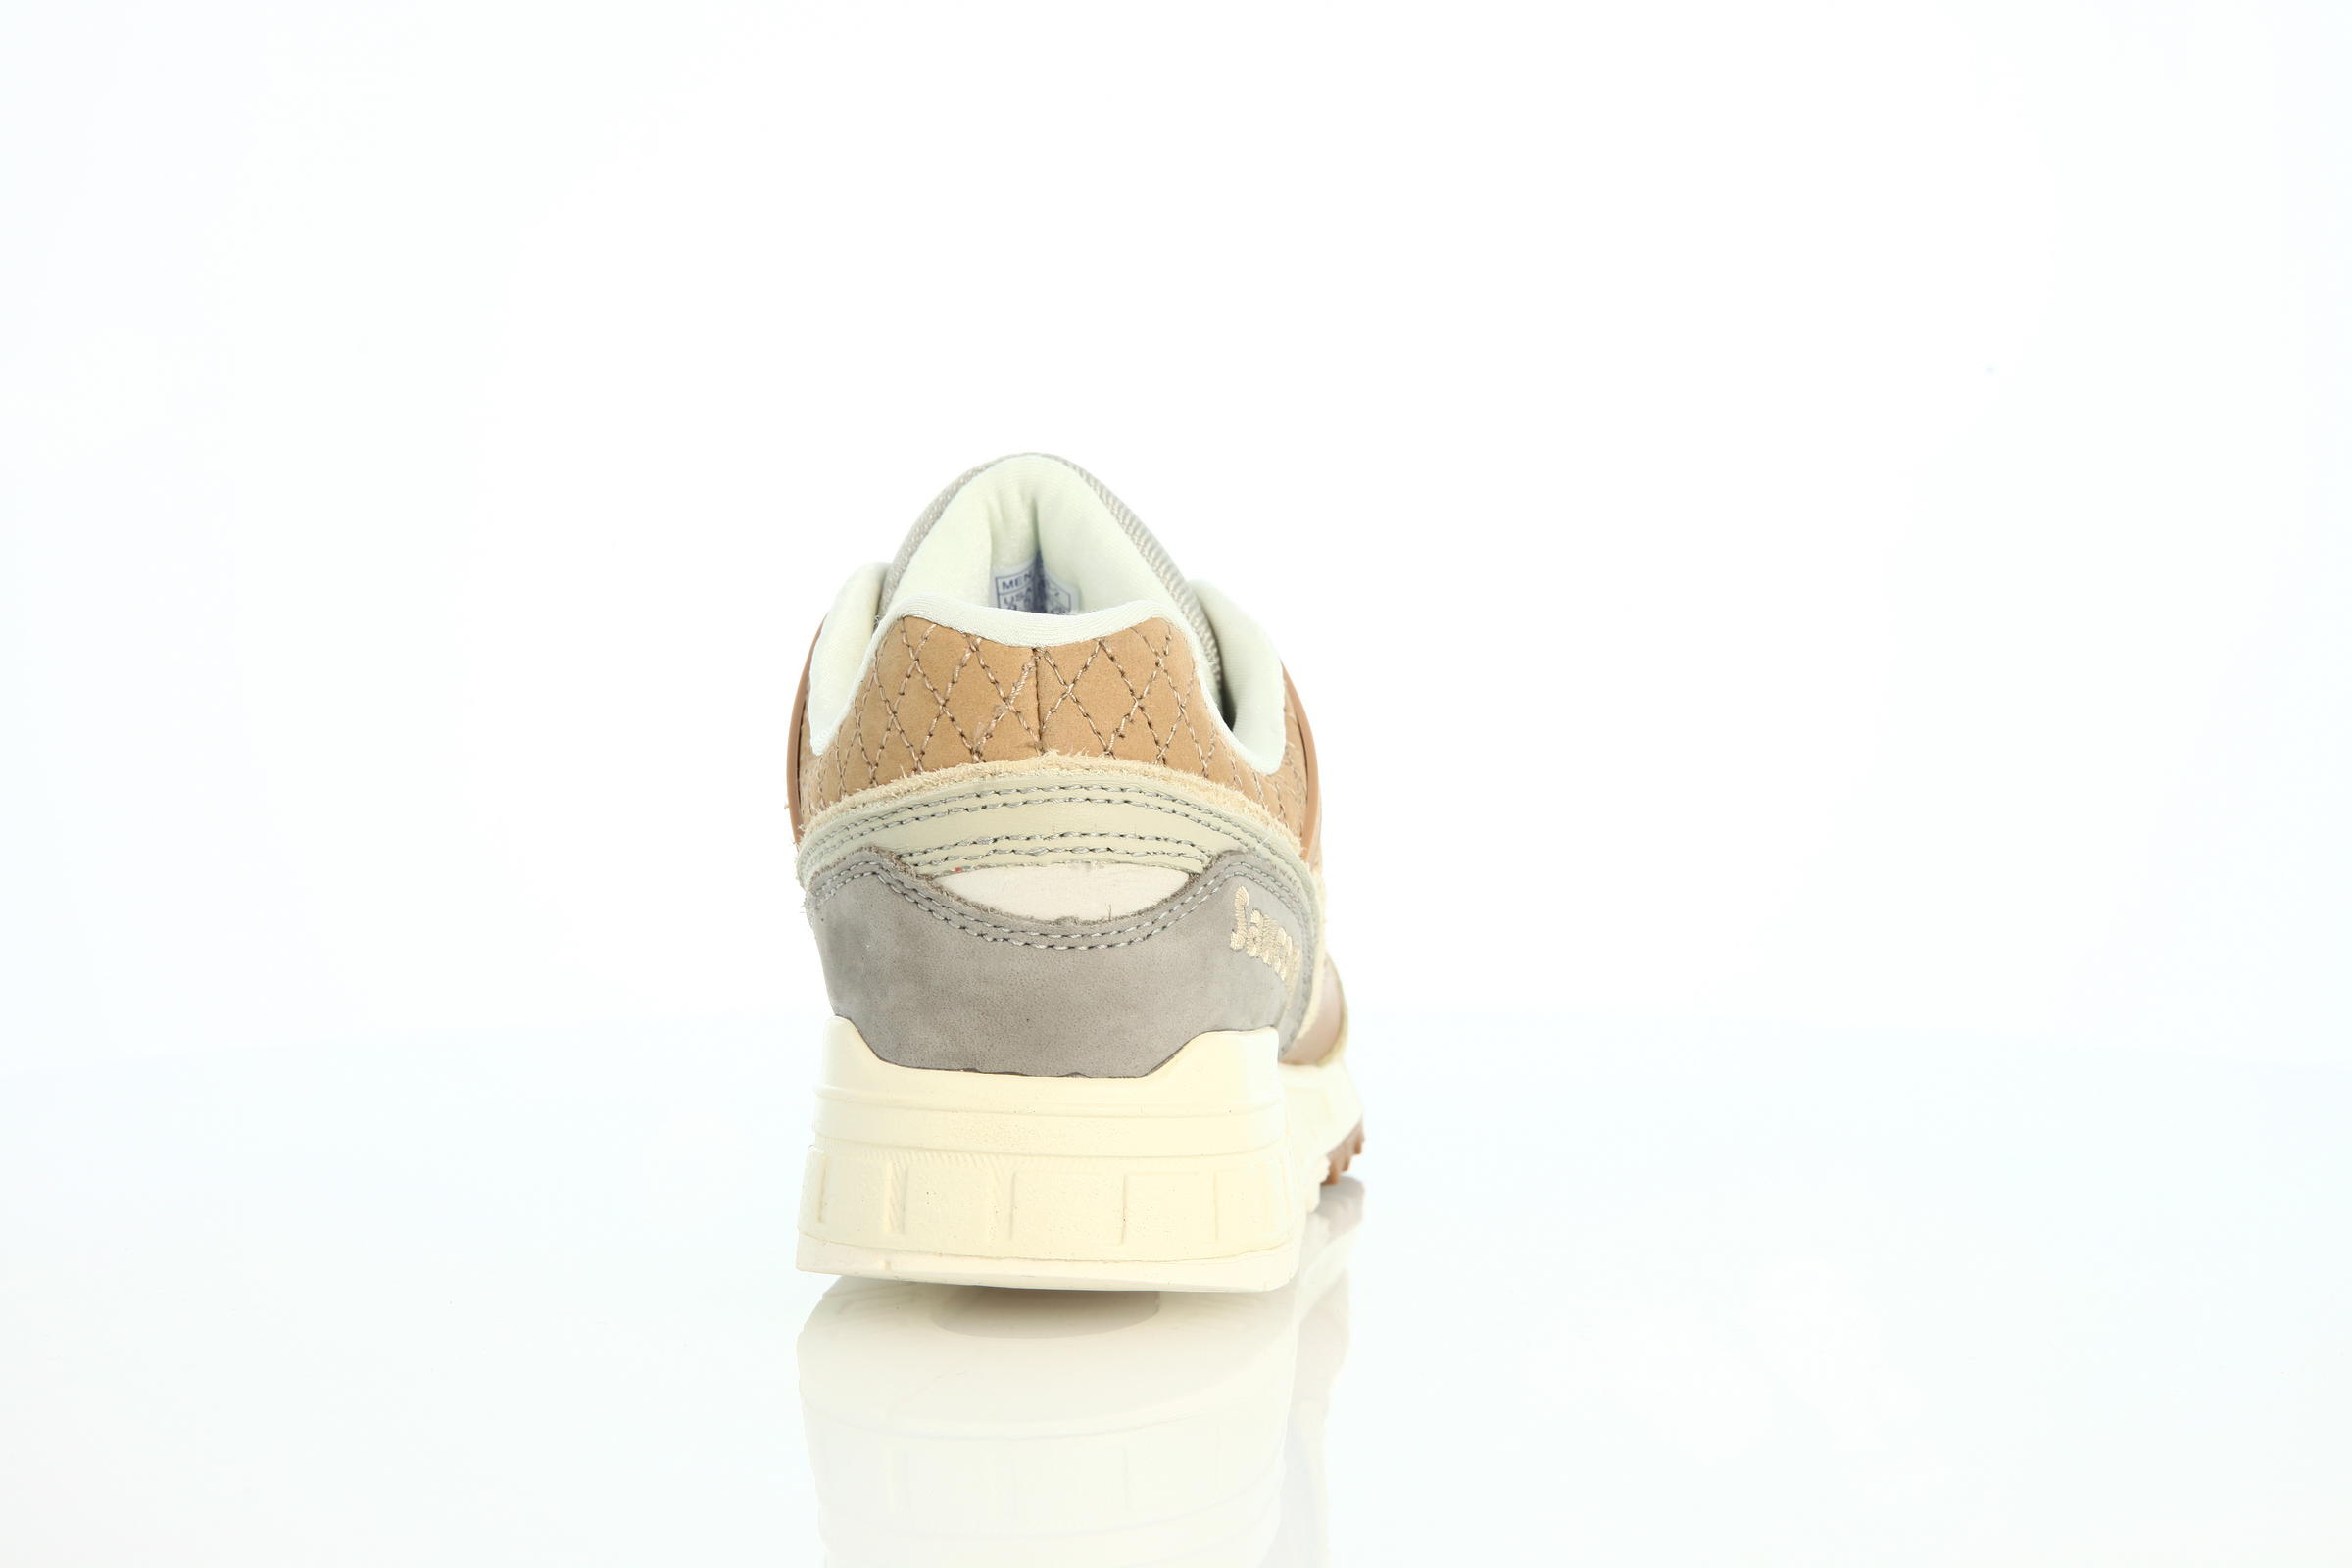 Saucony Grid Sd Quilted "Tan"